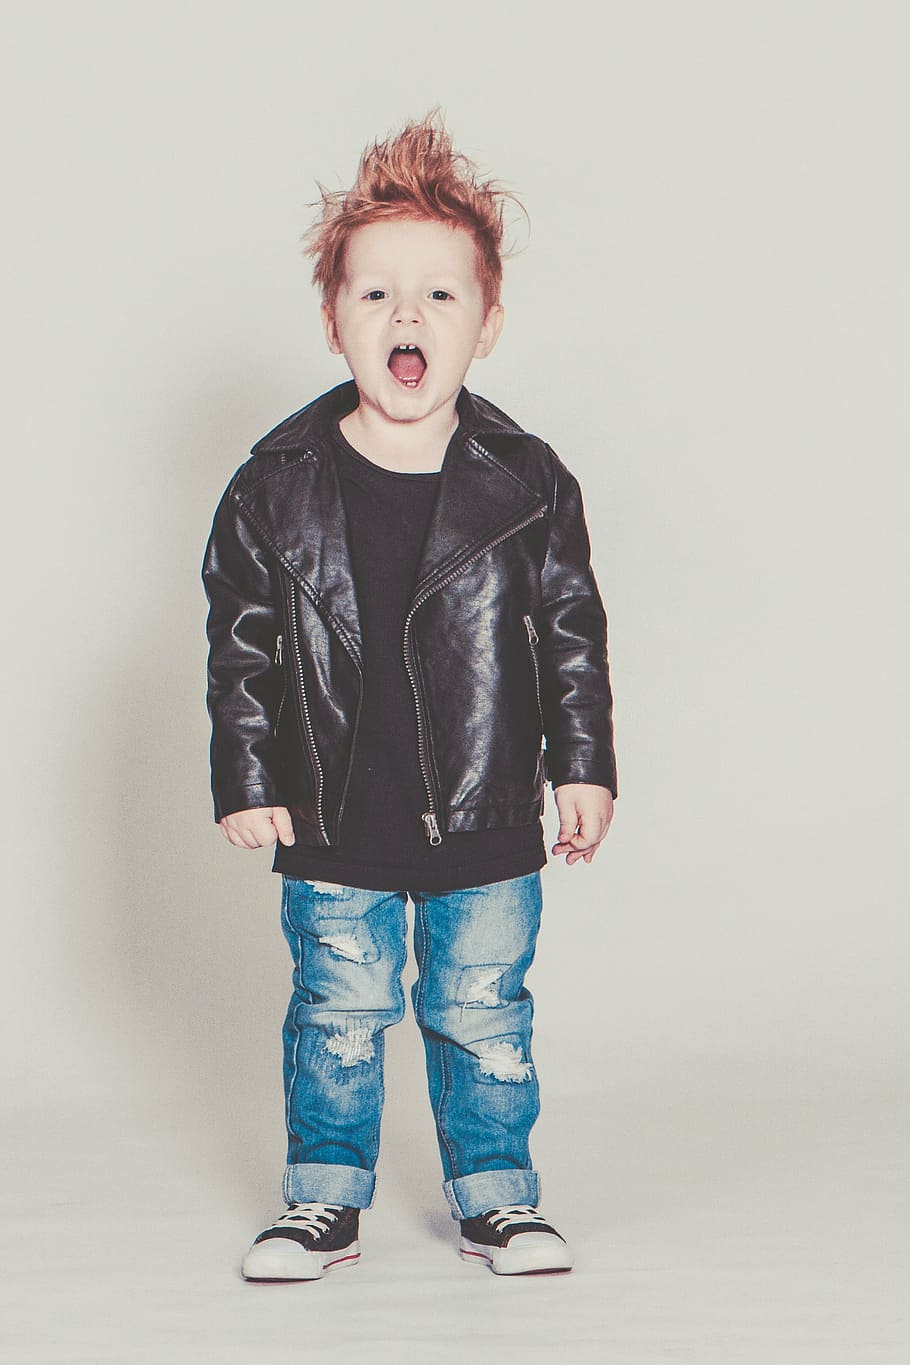 boy opening, mouth, baby, perfecto, rock, punk, leather jacket, boy, model, jeans